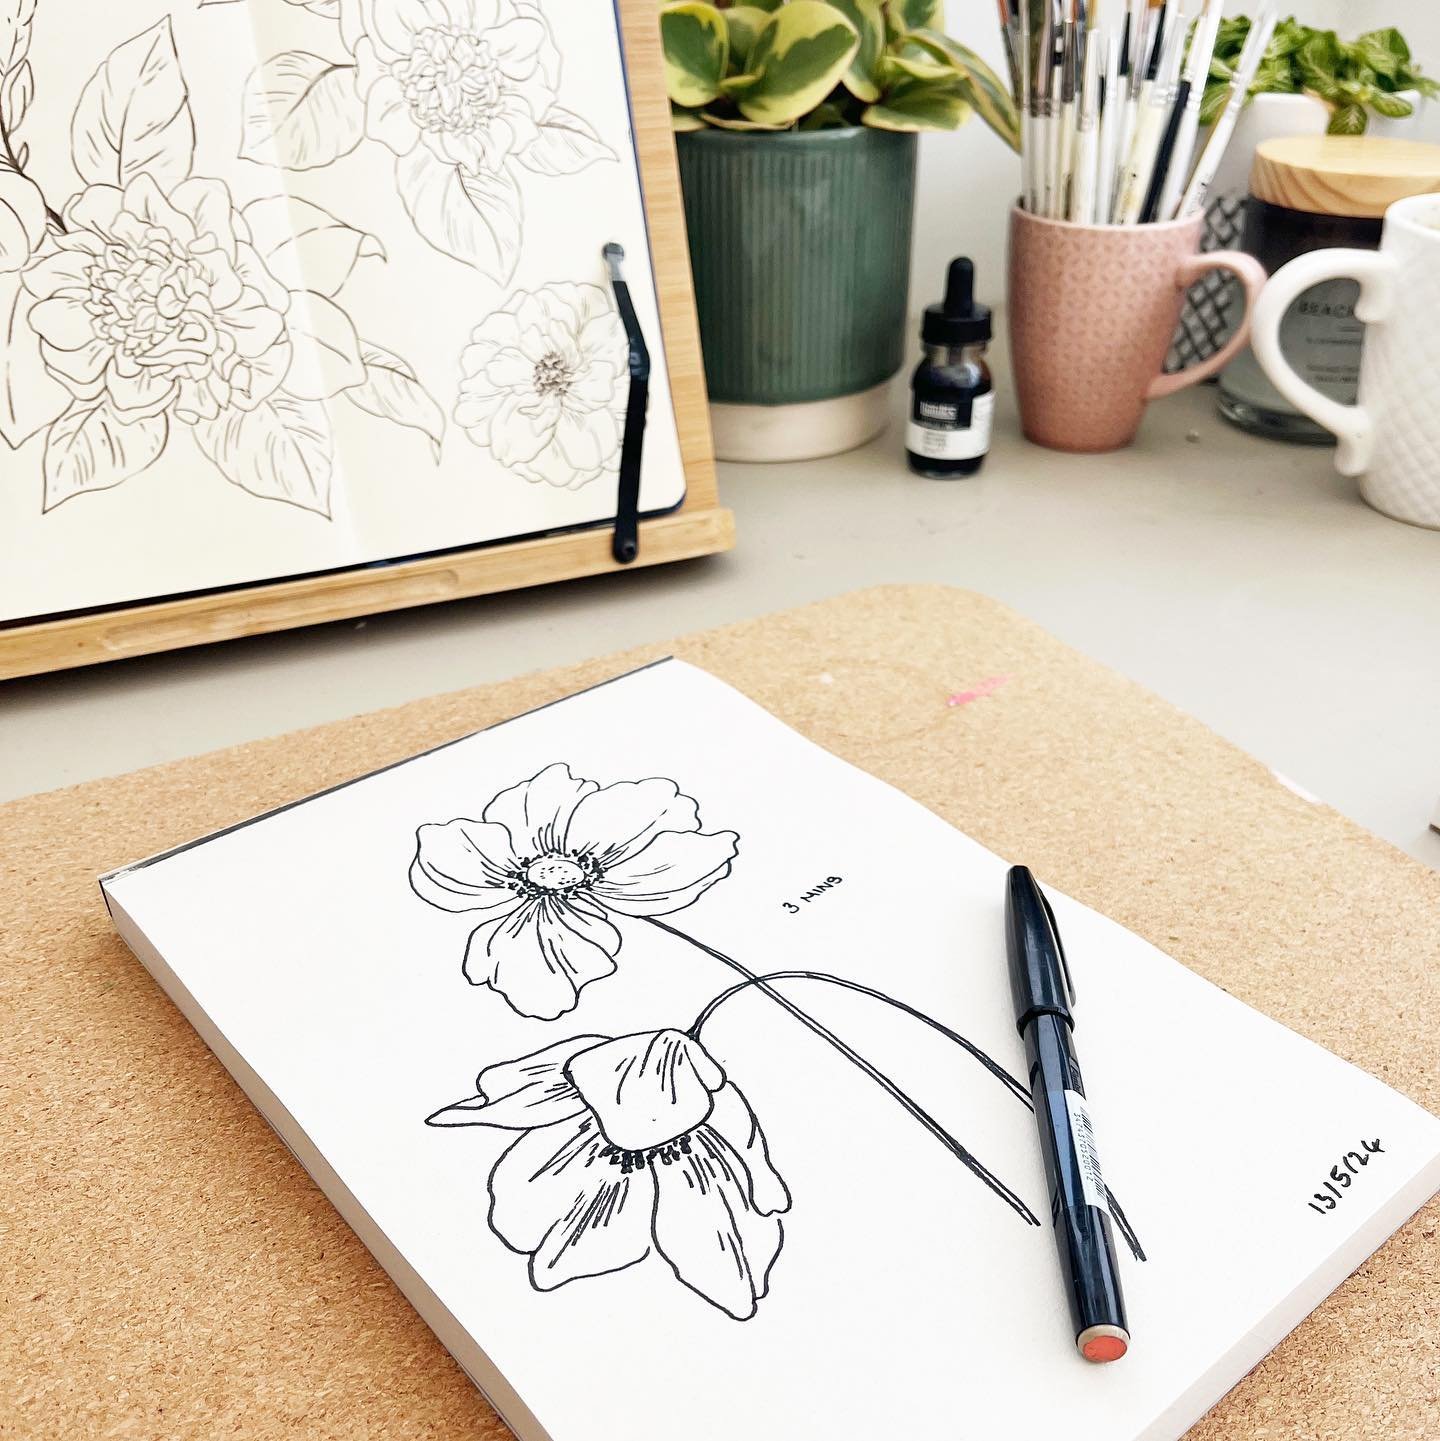 Quick Timer Drawings ✍️ I&rsquo;ve been setting a 3 minute timer and drawing some quick flowers to warm up for the day. There&rsquo;s a new post on Substack about where this idea came from! 🌿